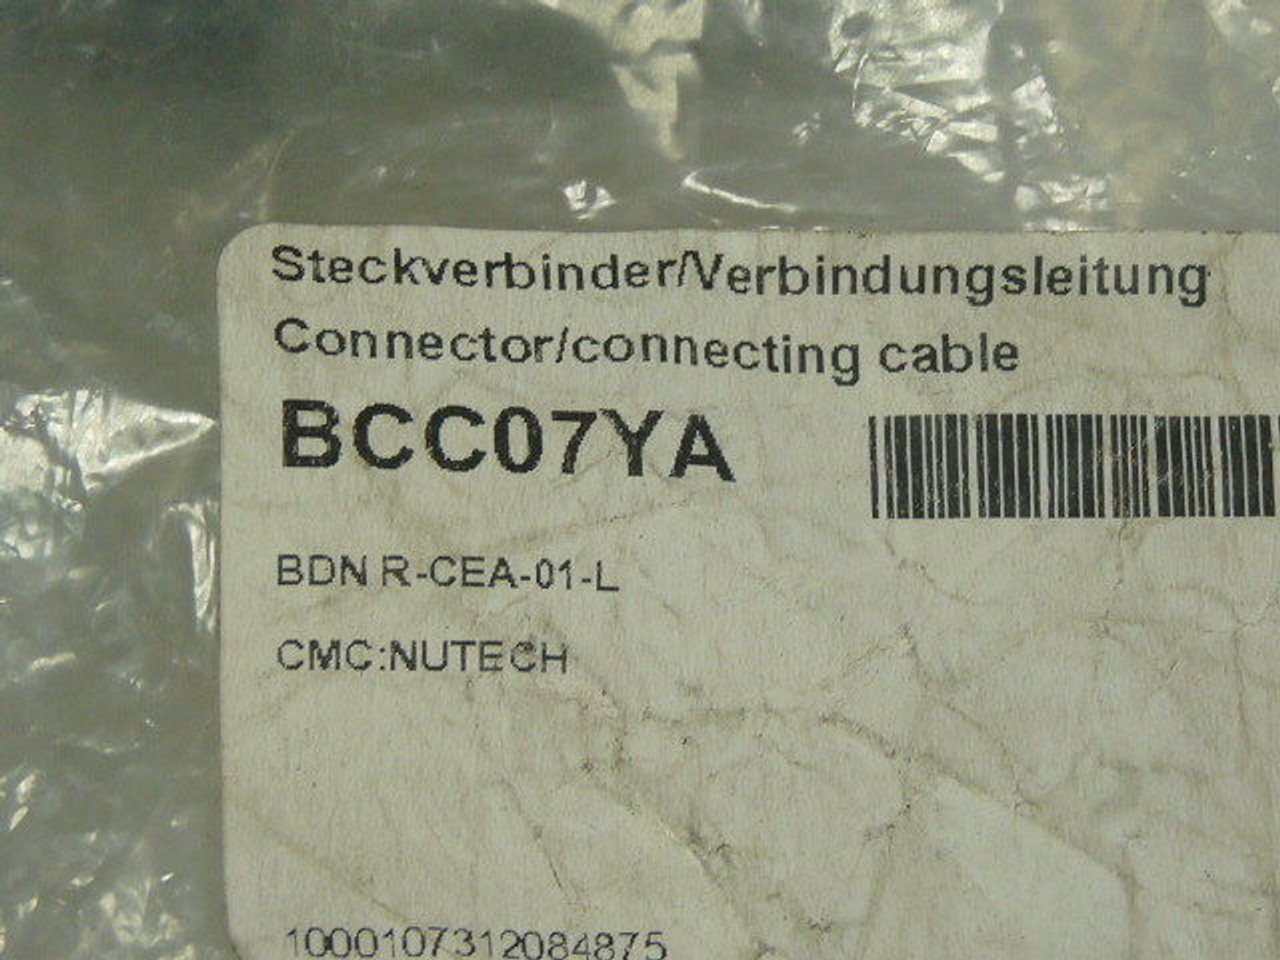 Balluff BCC07YA BDNR-CEA-01-L Devicenet Connector Cable Accessory ! NEW !